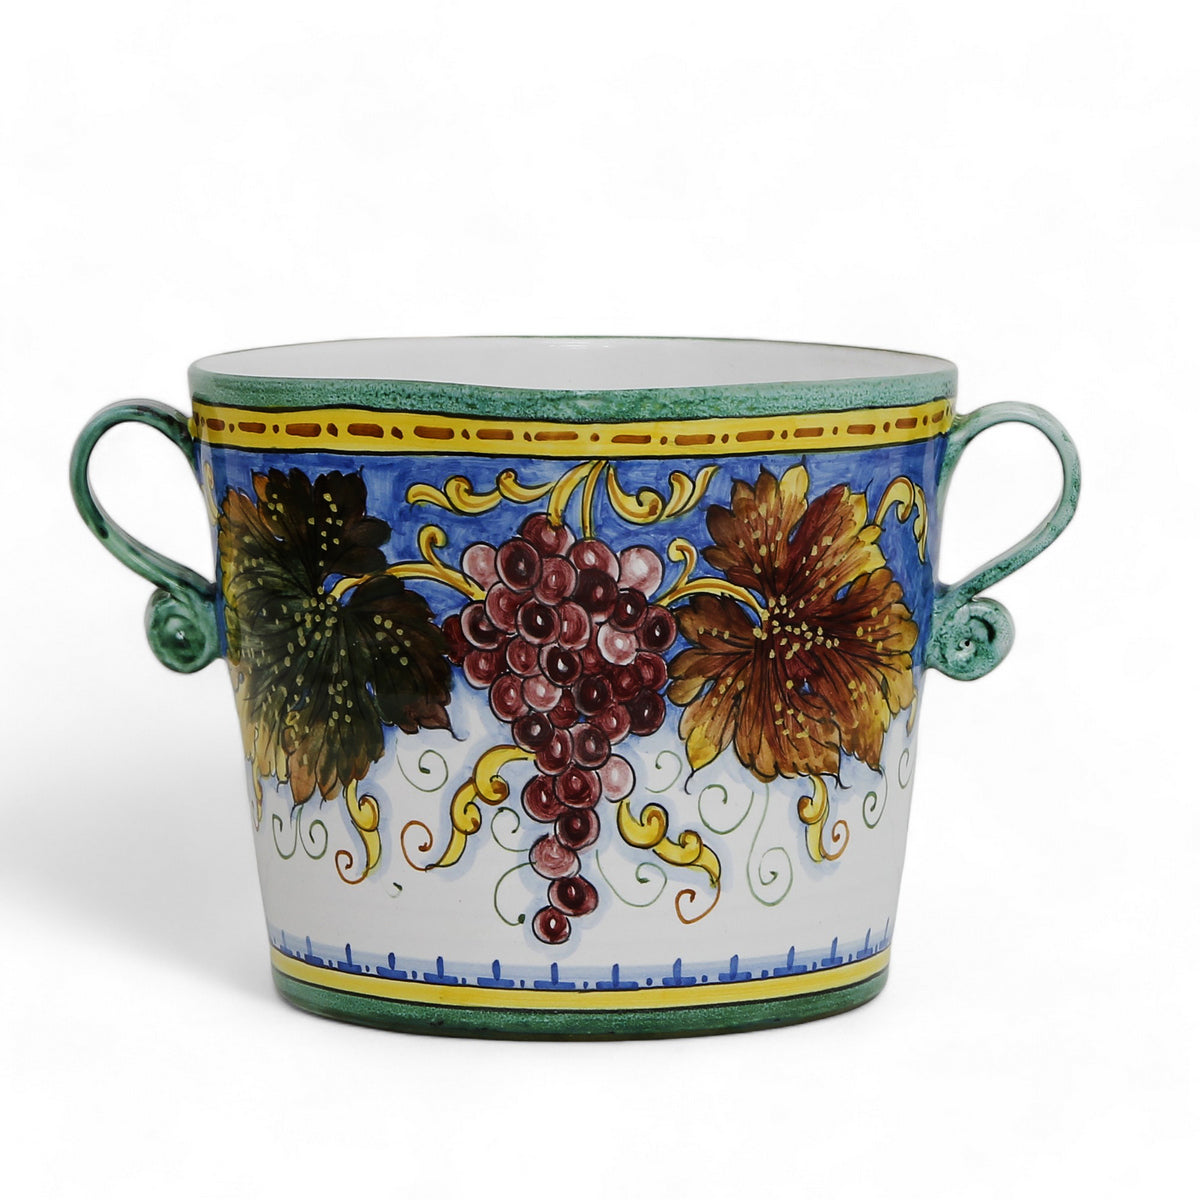 TUSCAN MAJOLICA: Luxury Ice Bucket adorned with traditional Tuscan grape leaves